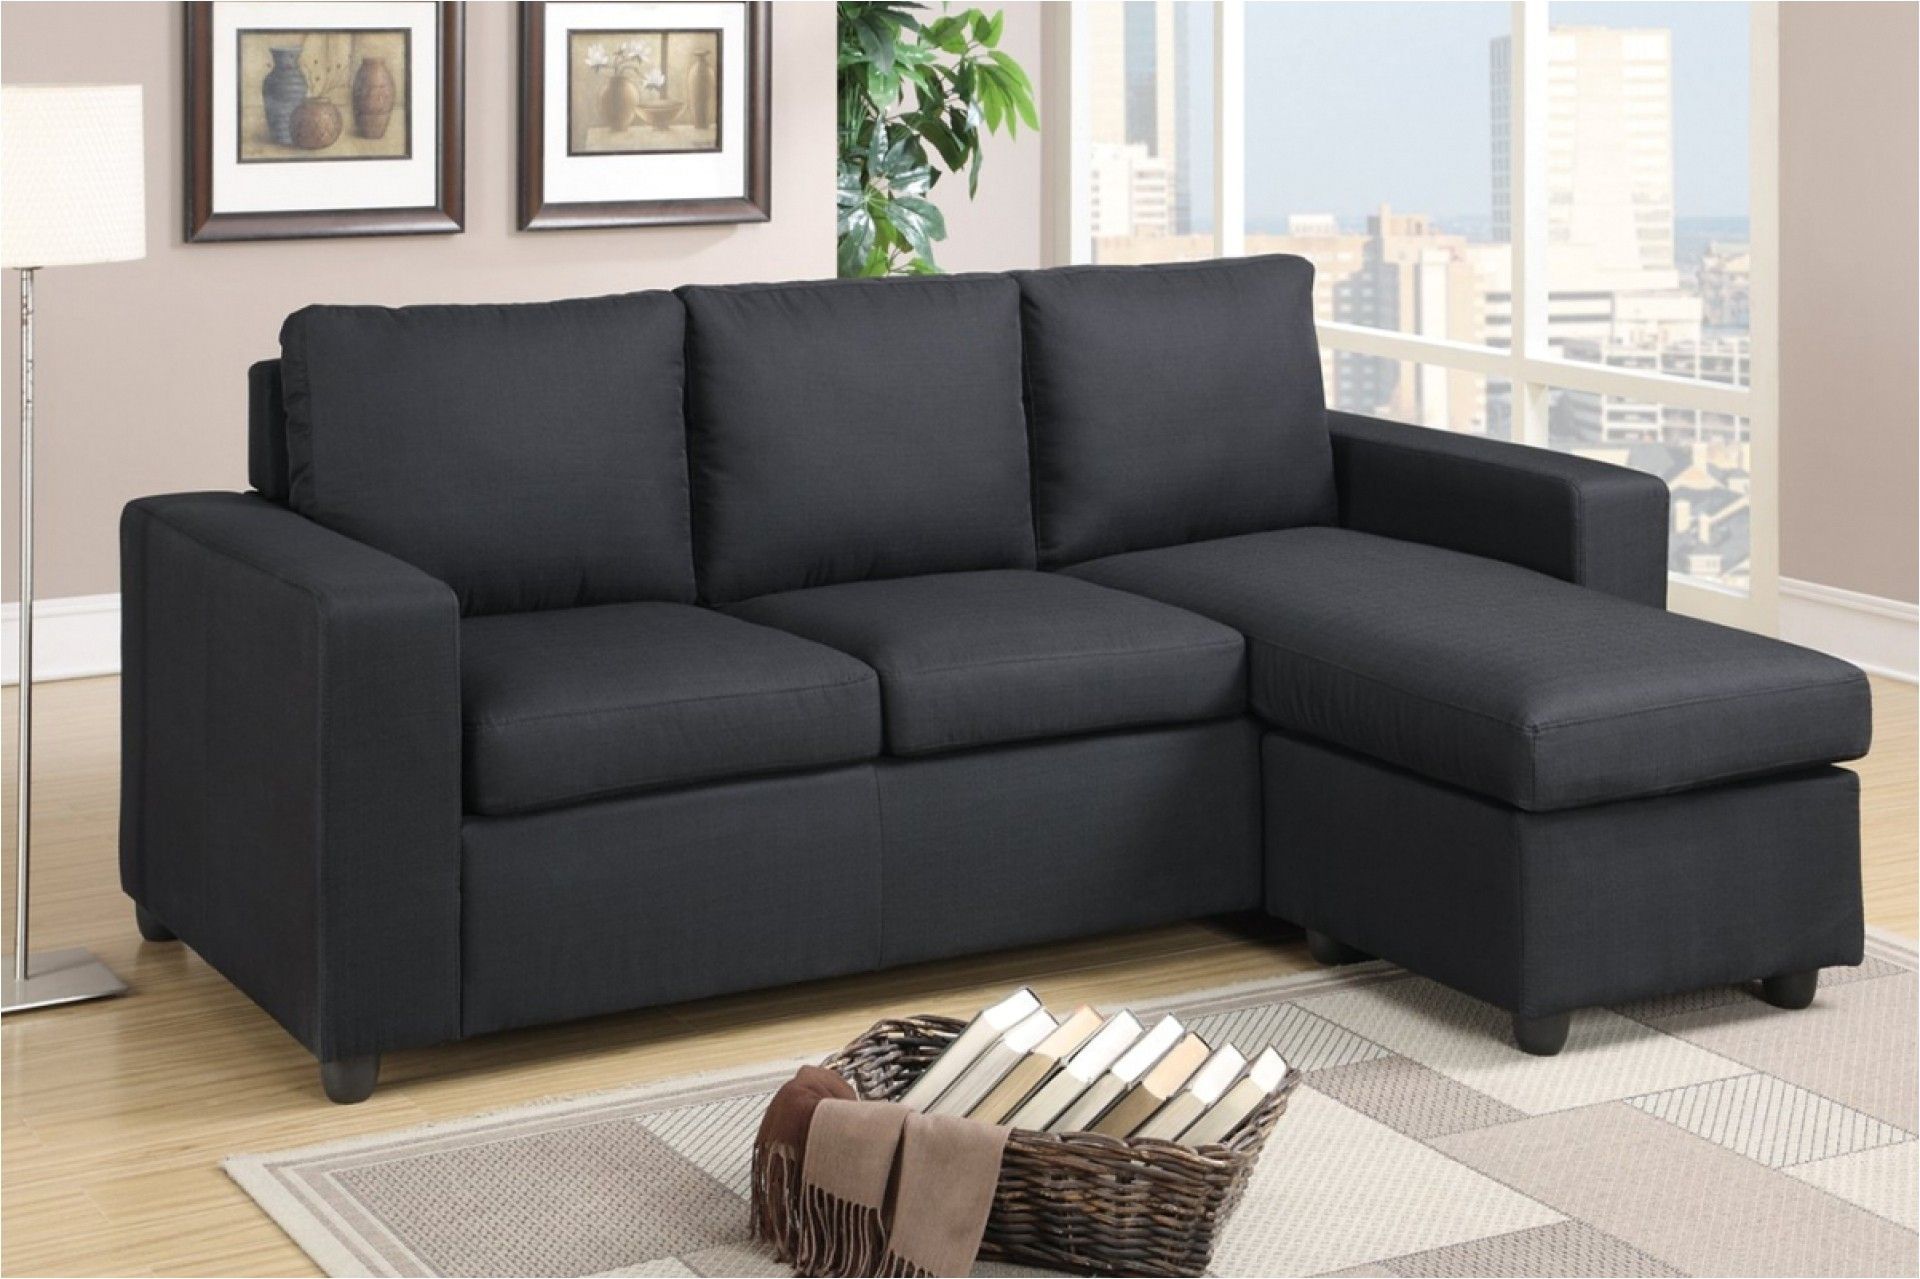 What Is A Reversible Chaise Sofa – Sofa Design Ideas Throughout Egan Ii Cement Sofa Sectionals With Reversible Chaise (View 5 of 30)